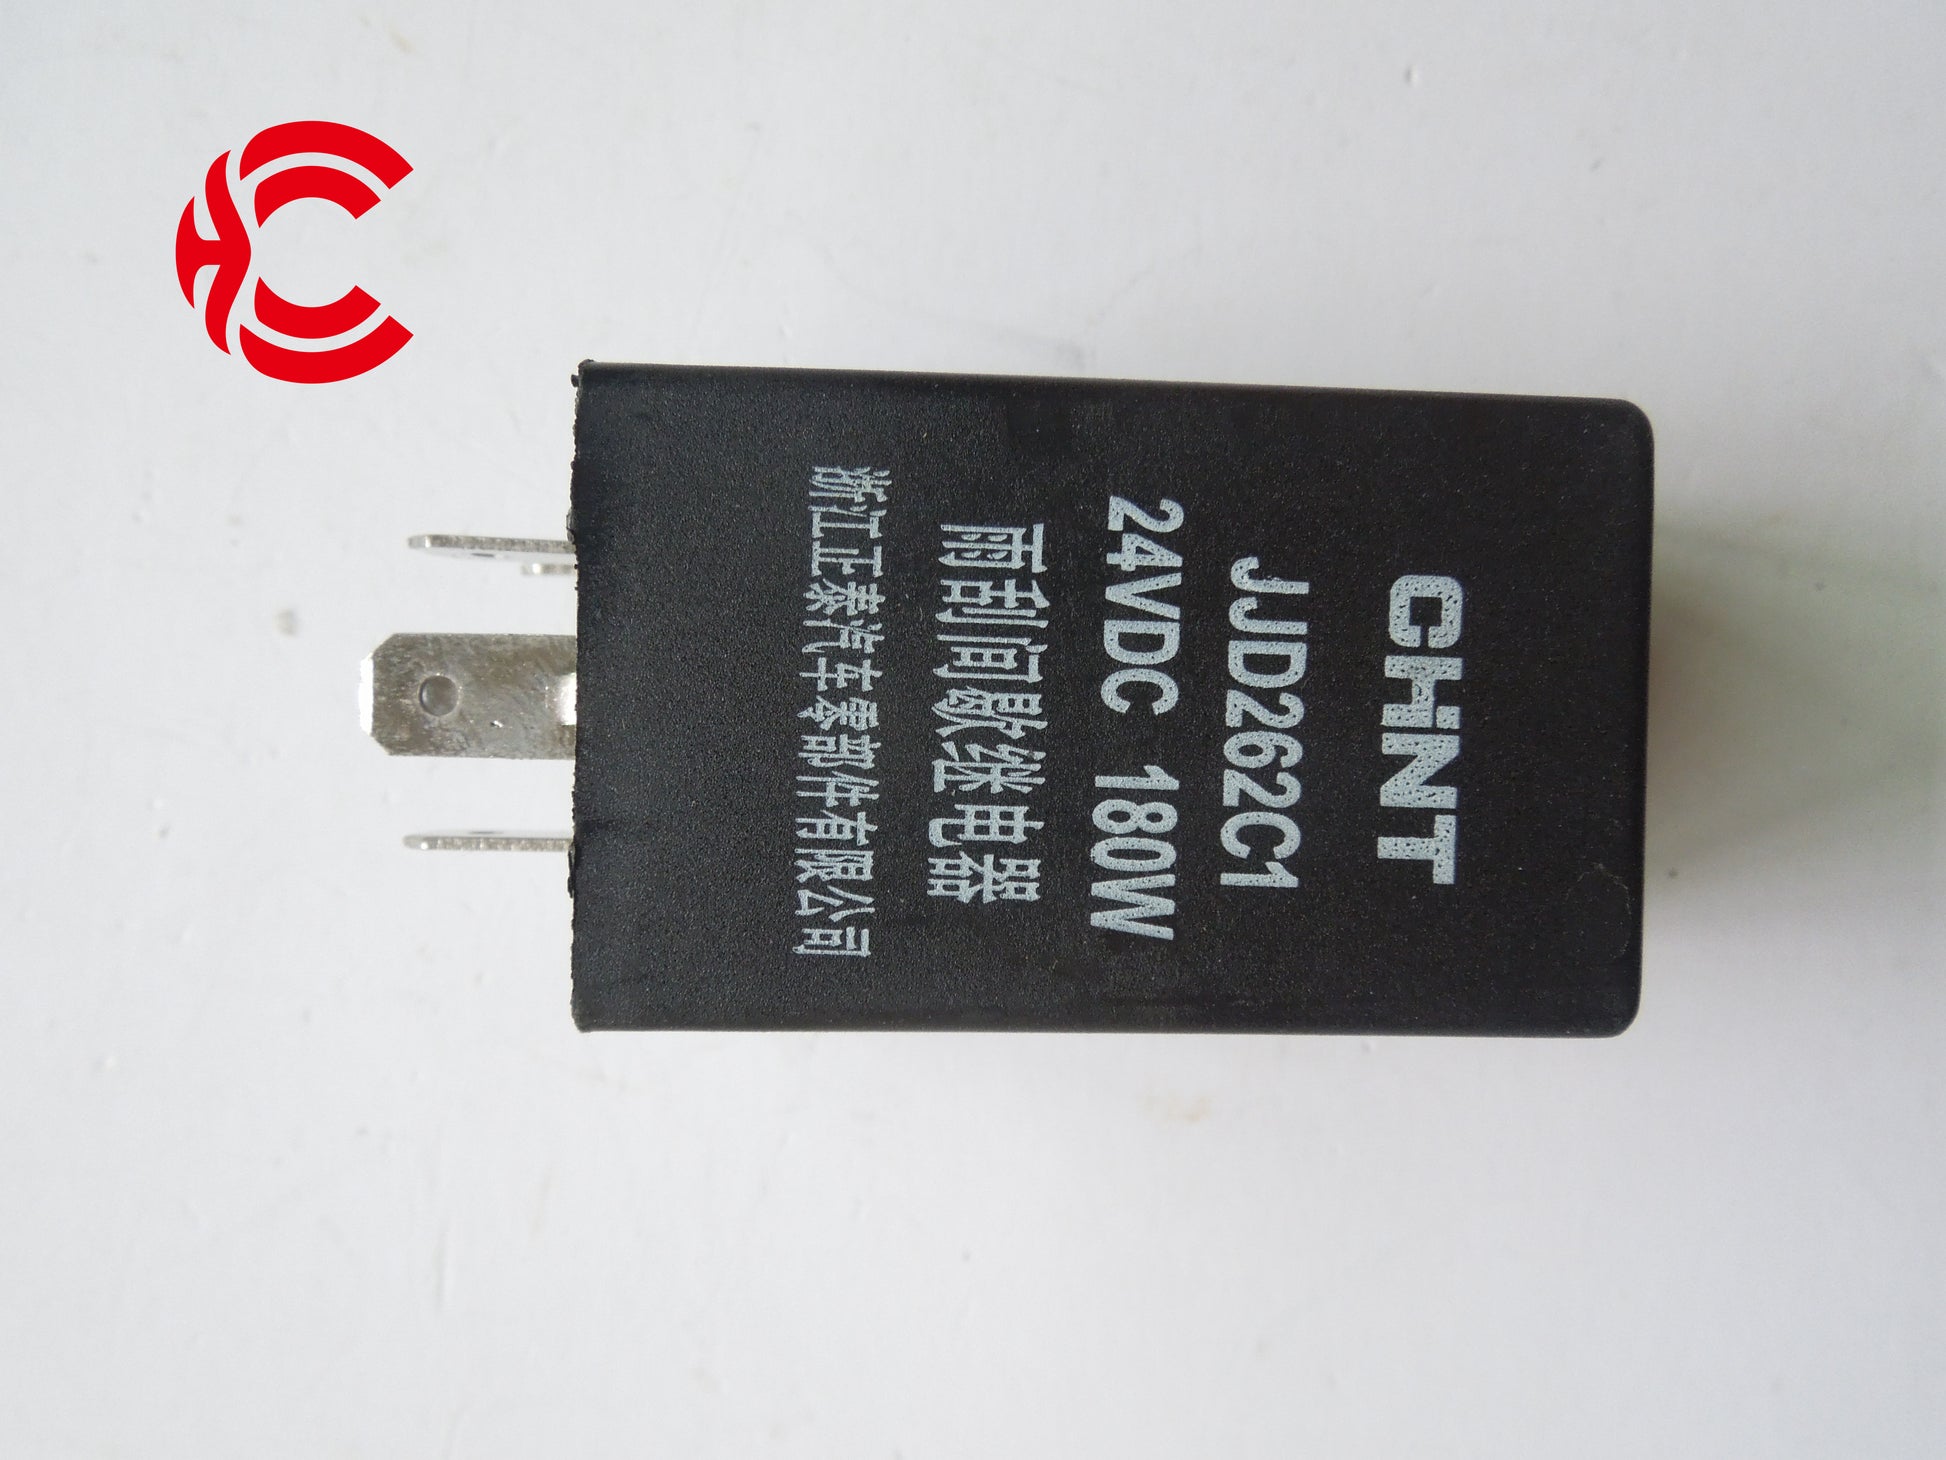 OEM: JJD262C1 Positive ControlMaterial: ABS Color: black Origin: Made in ChinaWeight: 50gPacking List: 1* Wiper Intermittent Relay More ServiceWe can provide OEM Manufacturing serviceWe can Be your one-step solution for Auto PartsWe can provide technical scheme for you Feel Free to Contact Us, We will get back to you as soon as possible.